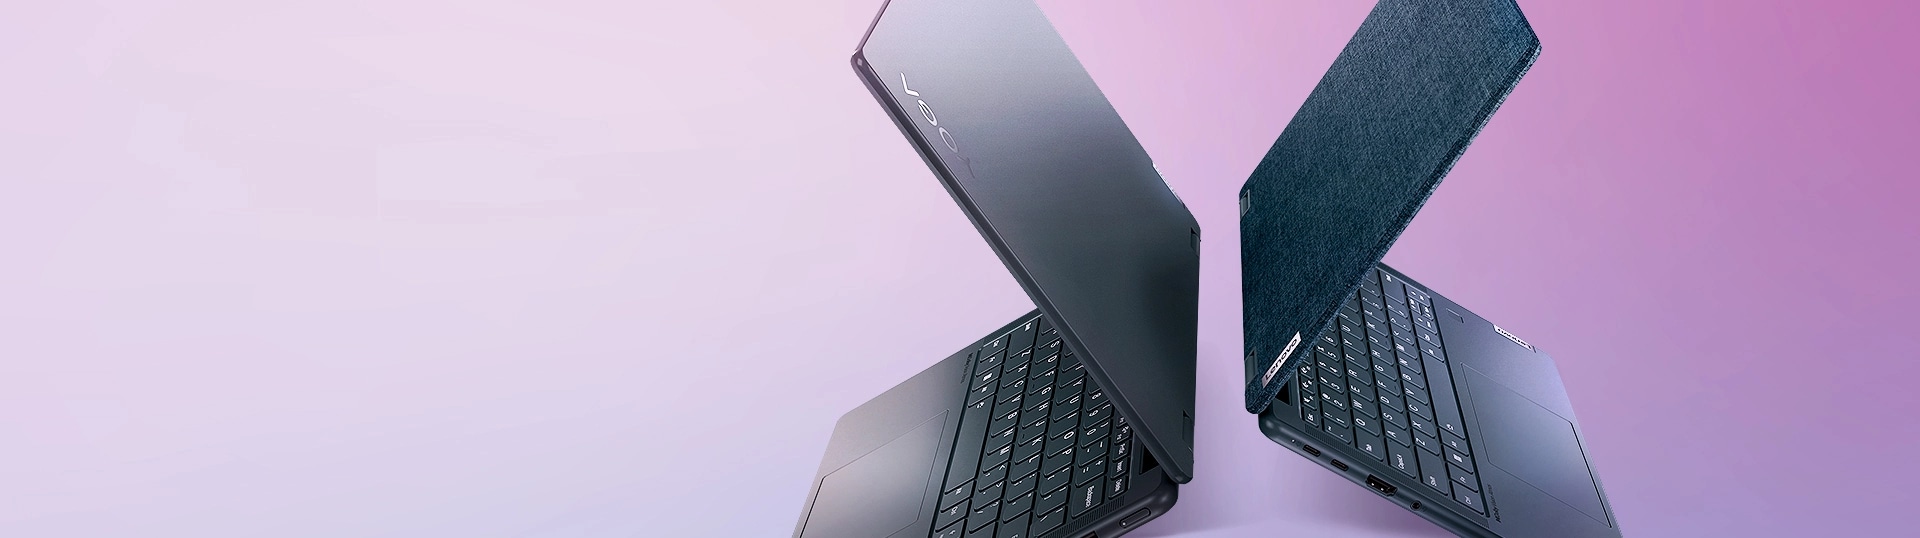 Lenovo Yoga 6 AMD Laptop with metal and fabric cover